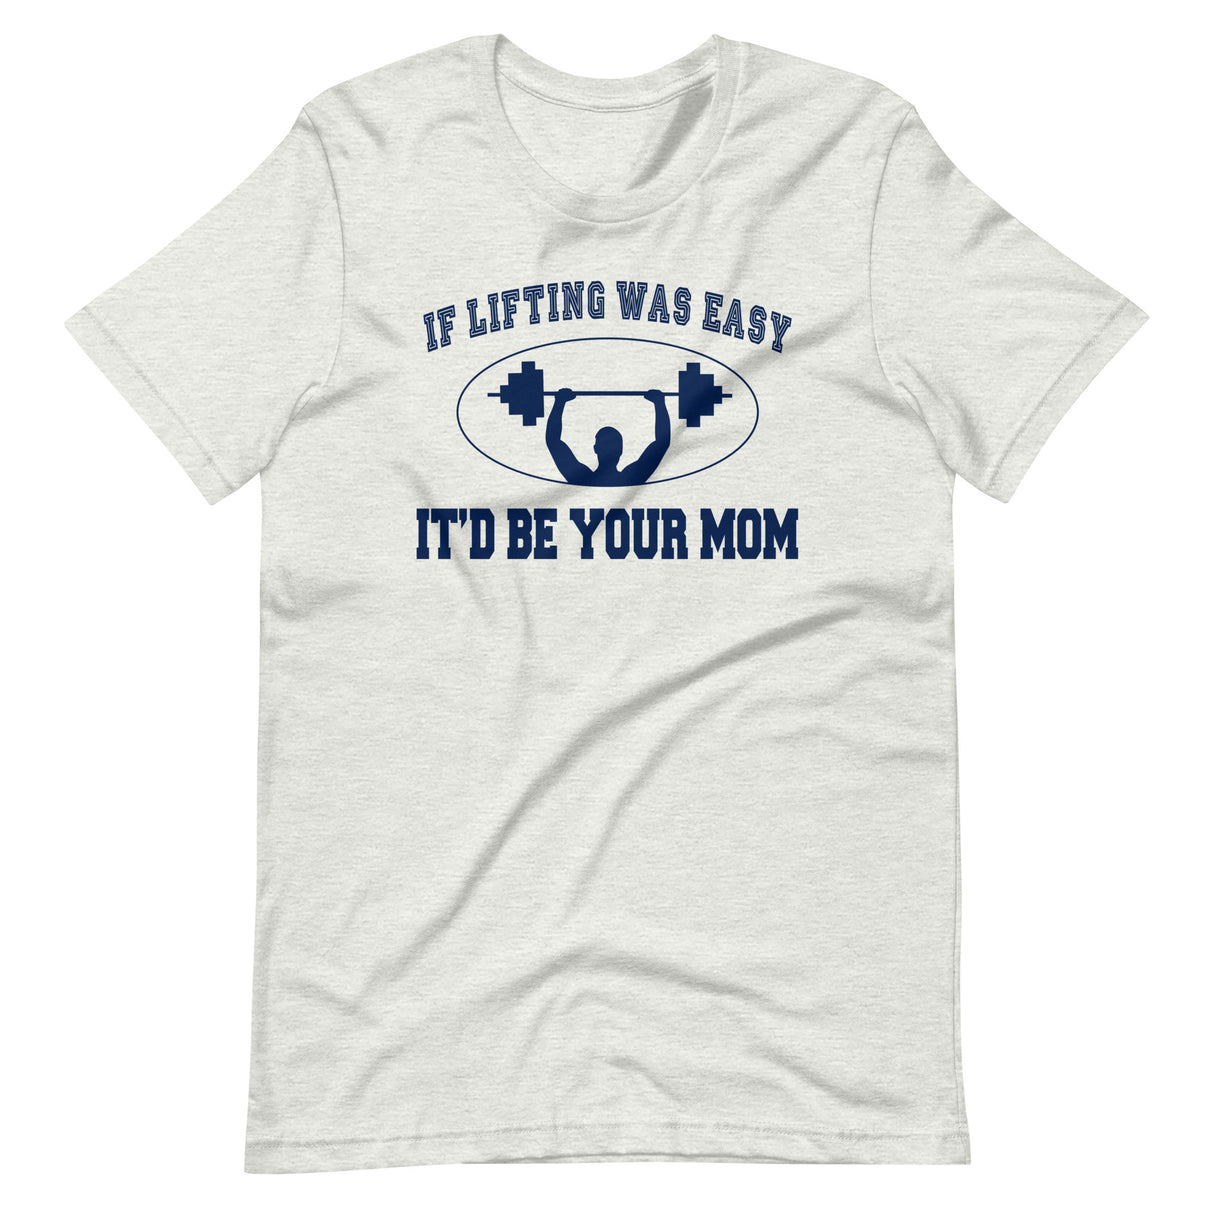 If Lifting Was Easy It'd Be Your Mom Shirt